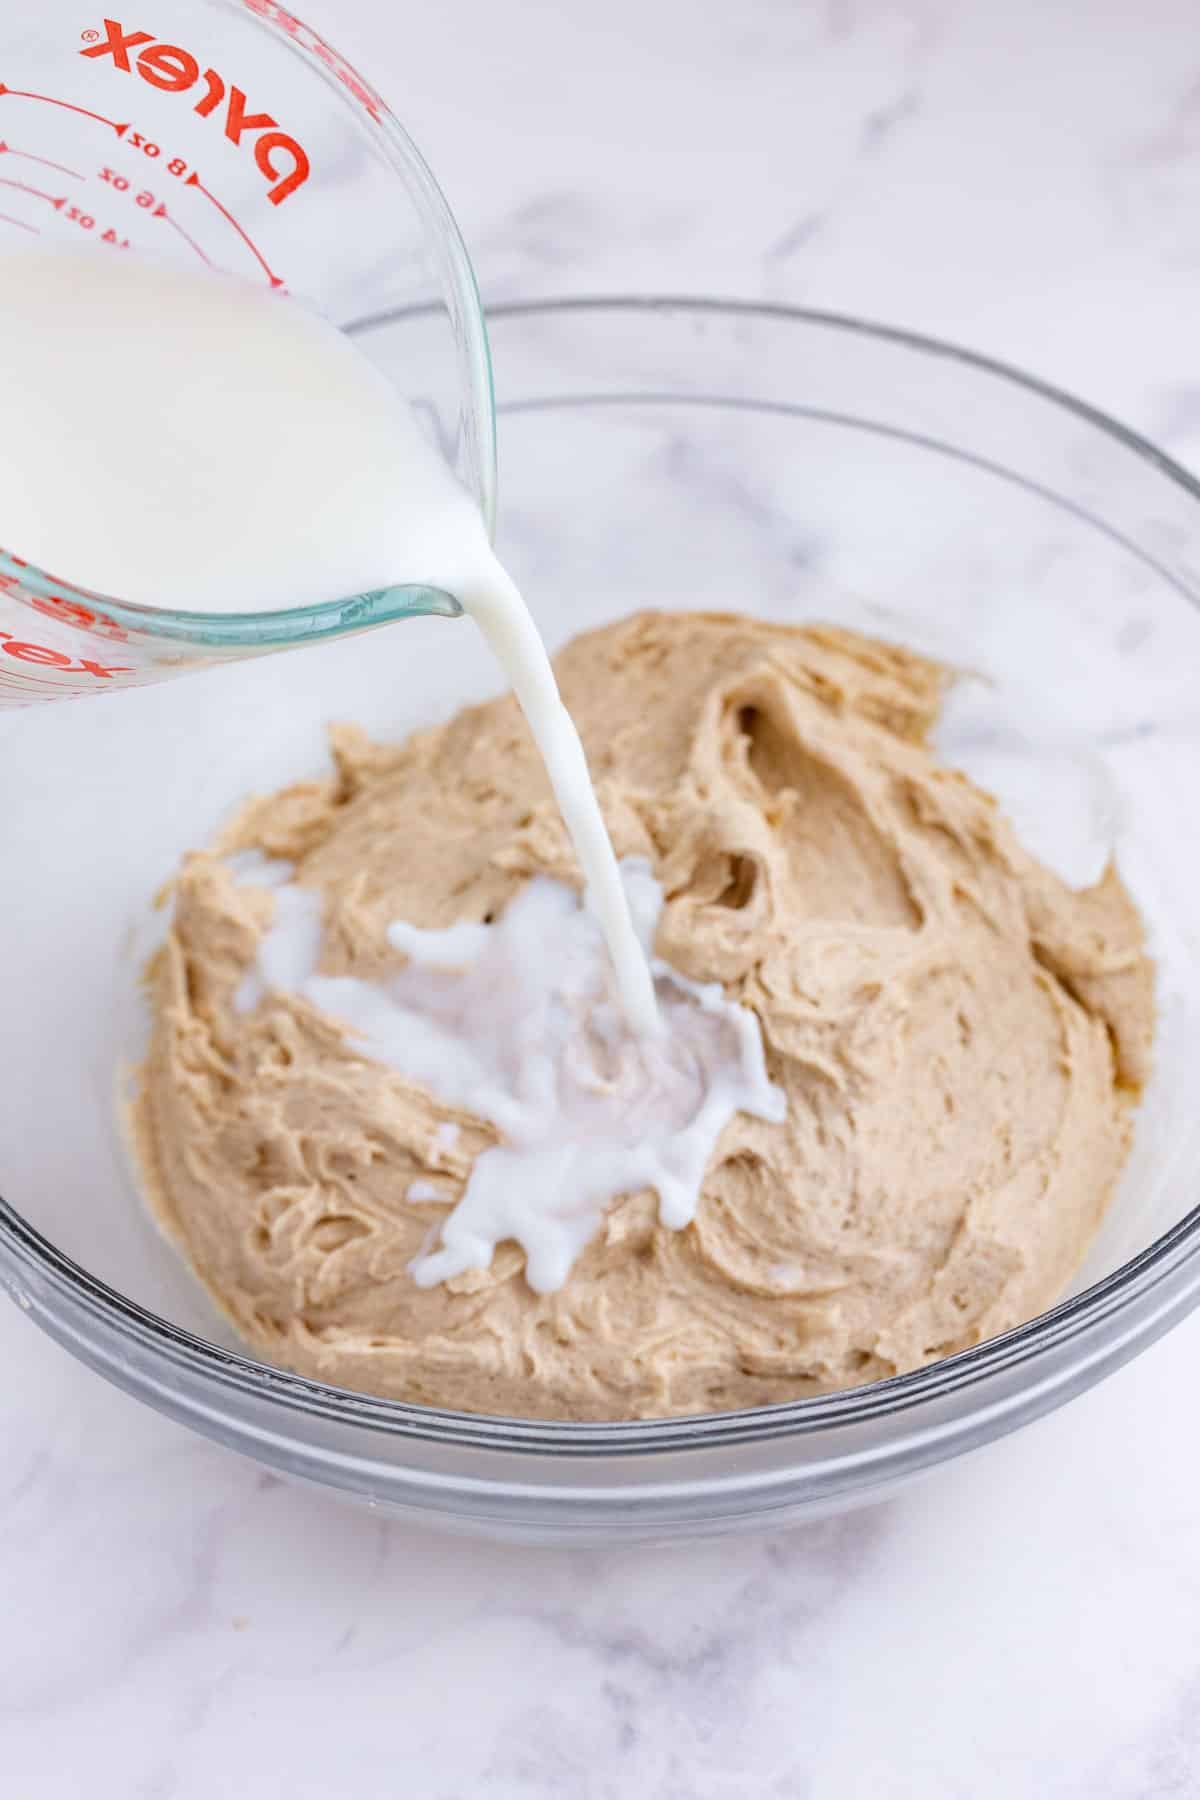 Milk is added to the cake batter.